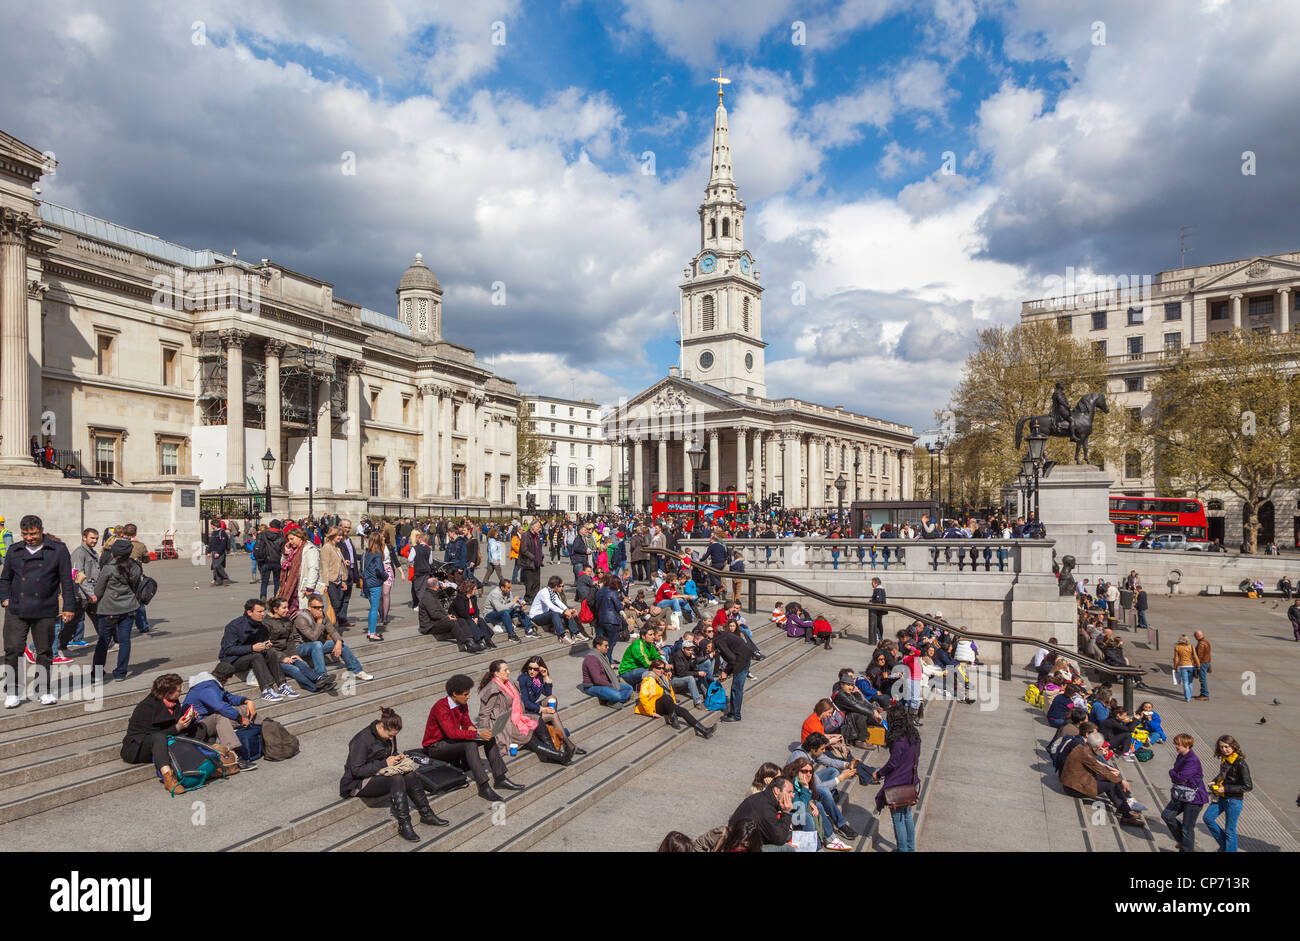 Trafalgar square with tourists relaxing on steps and st. martins-in-the-fields in the background. Stock Photo